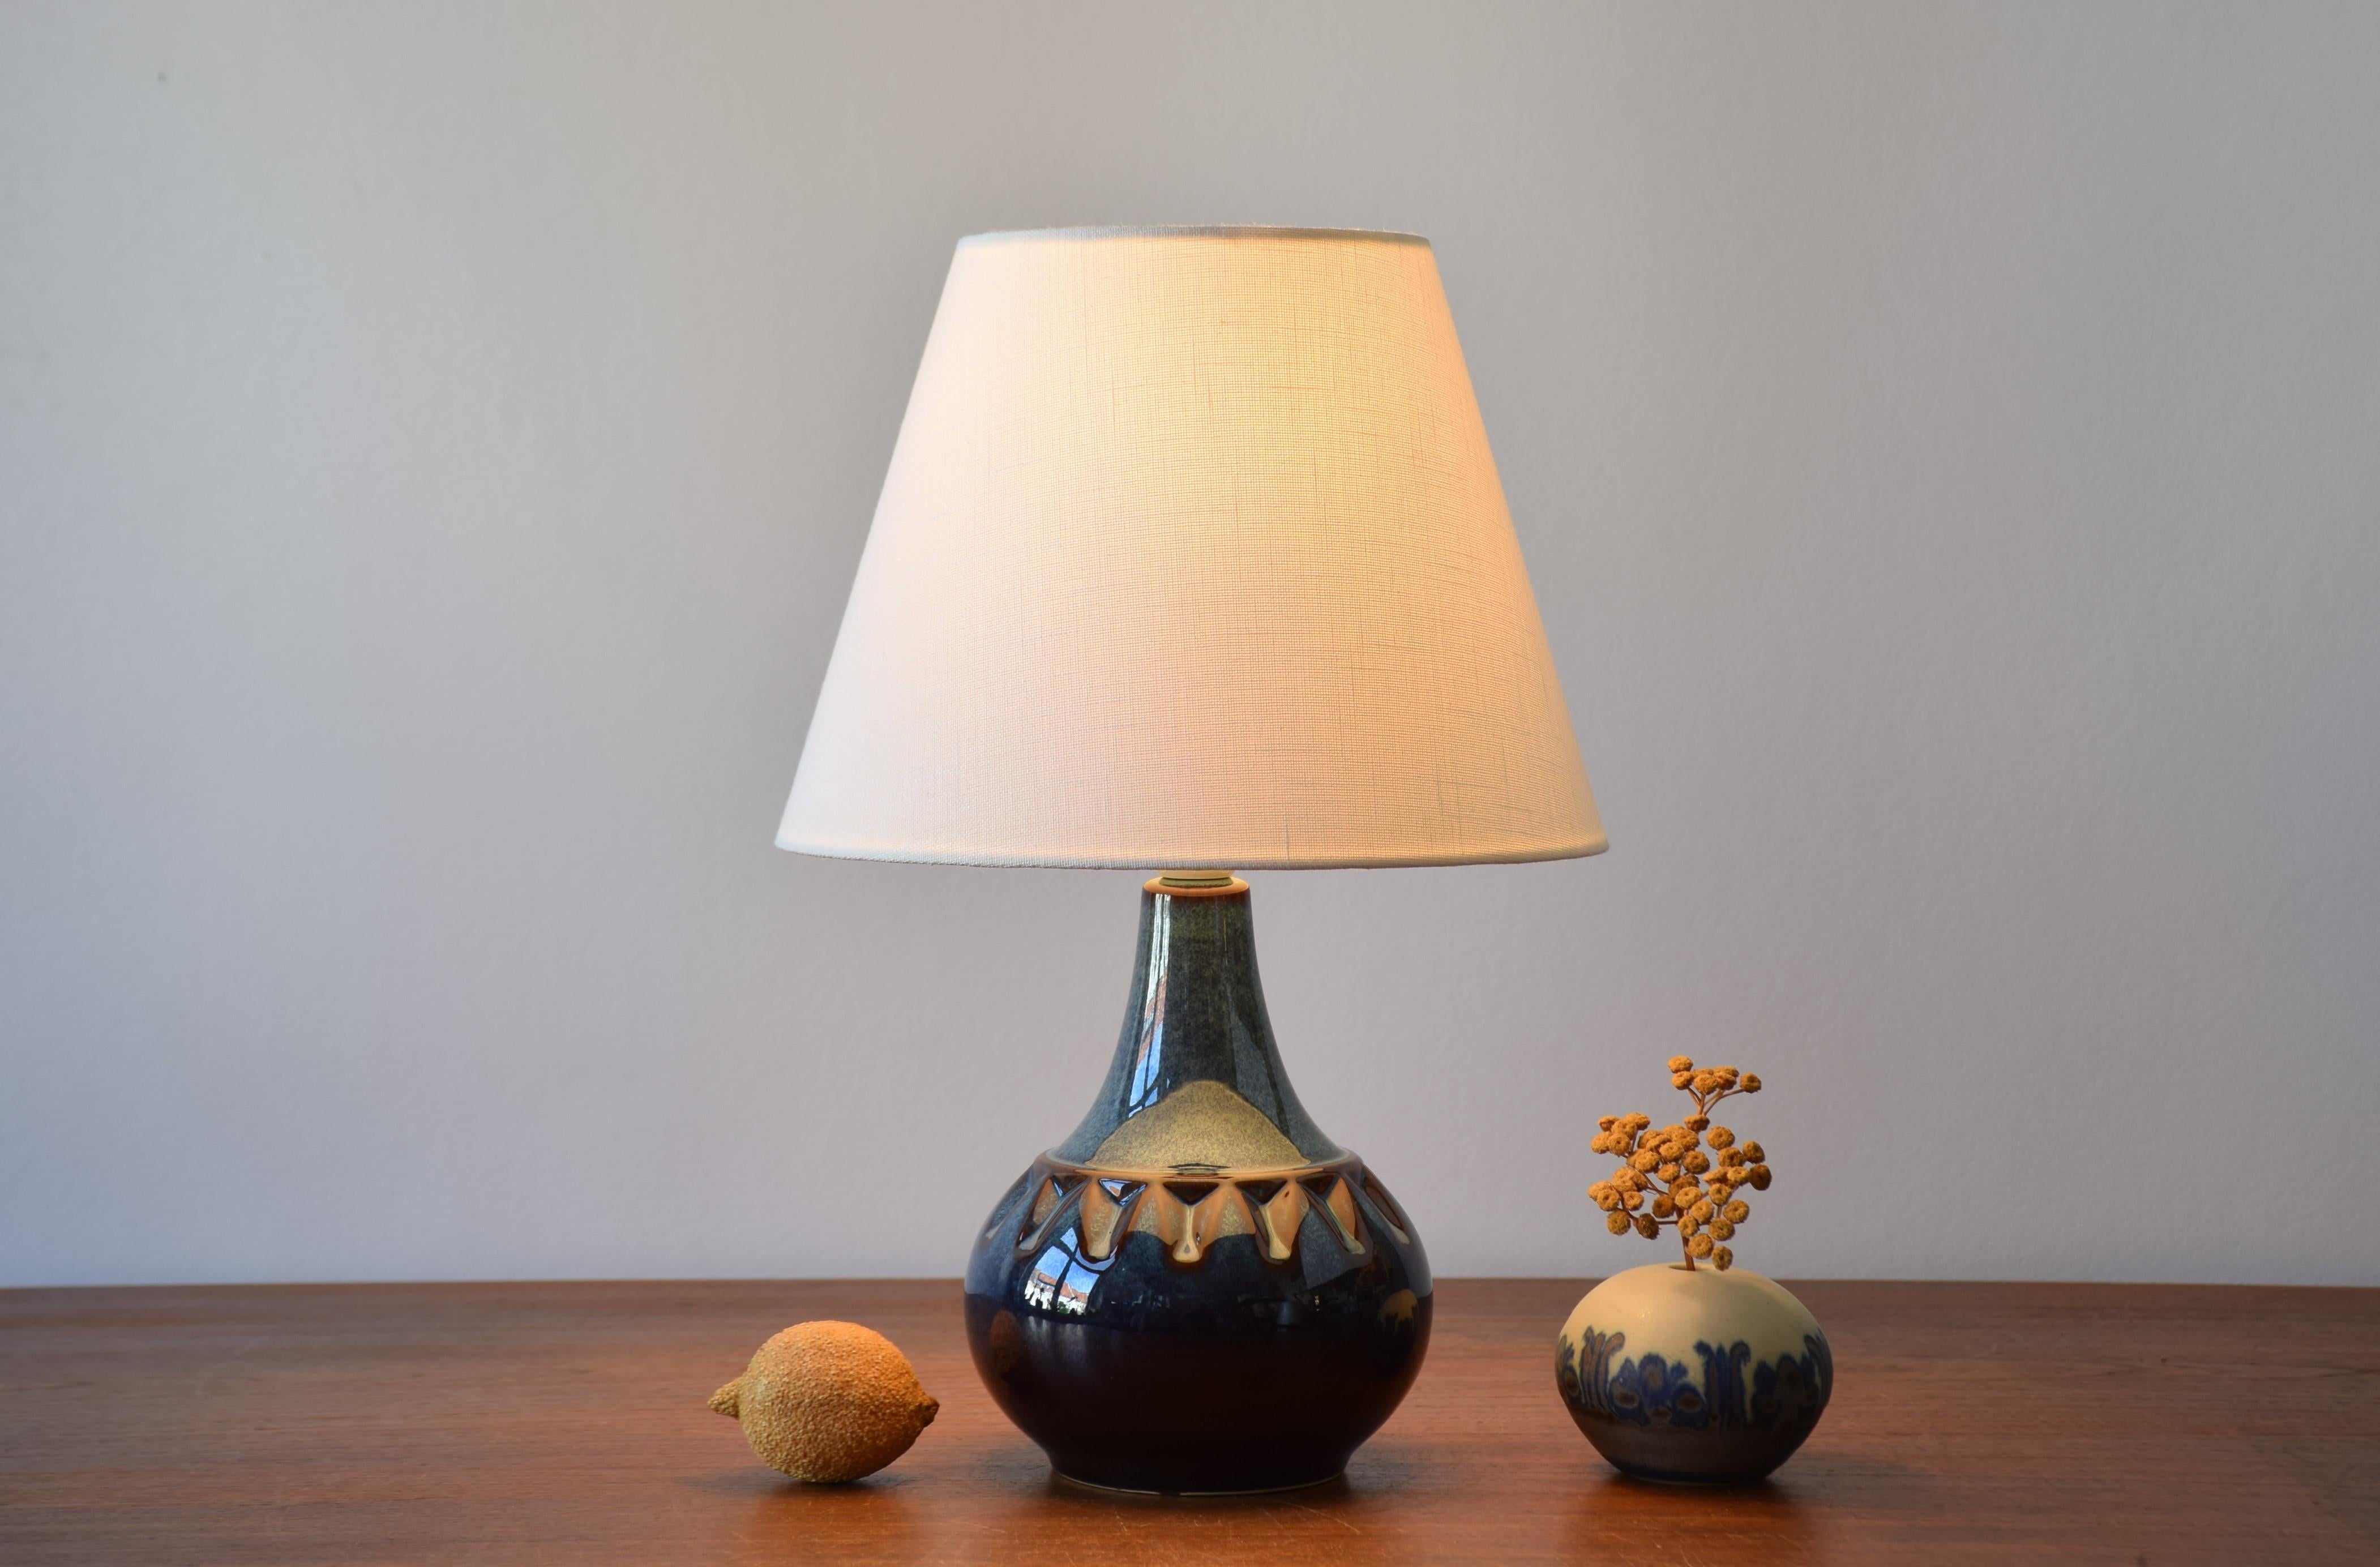 Midcentury Danish small table lamp by Søholm Stentøj, Denmark. Made circa 1960s.
The lamp has a shiny blue glaze with brown elements on the repeated decor around the shoulders of the body. 

Included is a new lamp shade designed in Denmark. It is